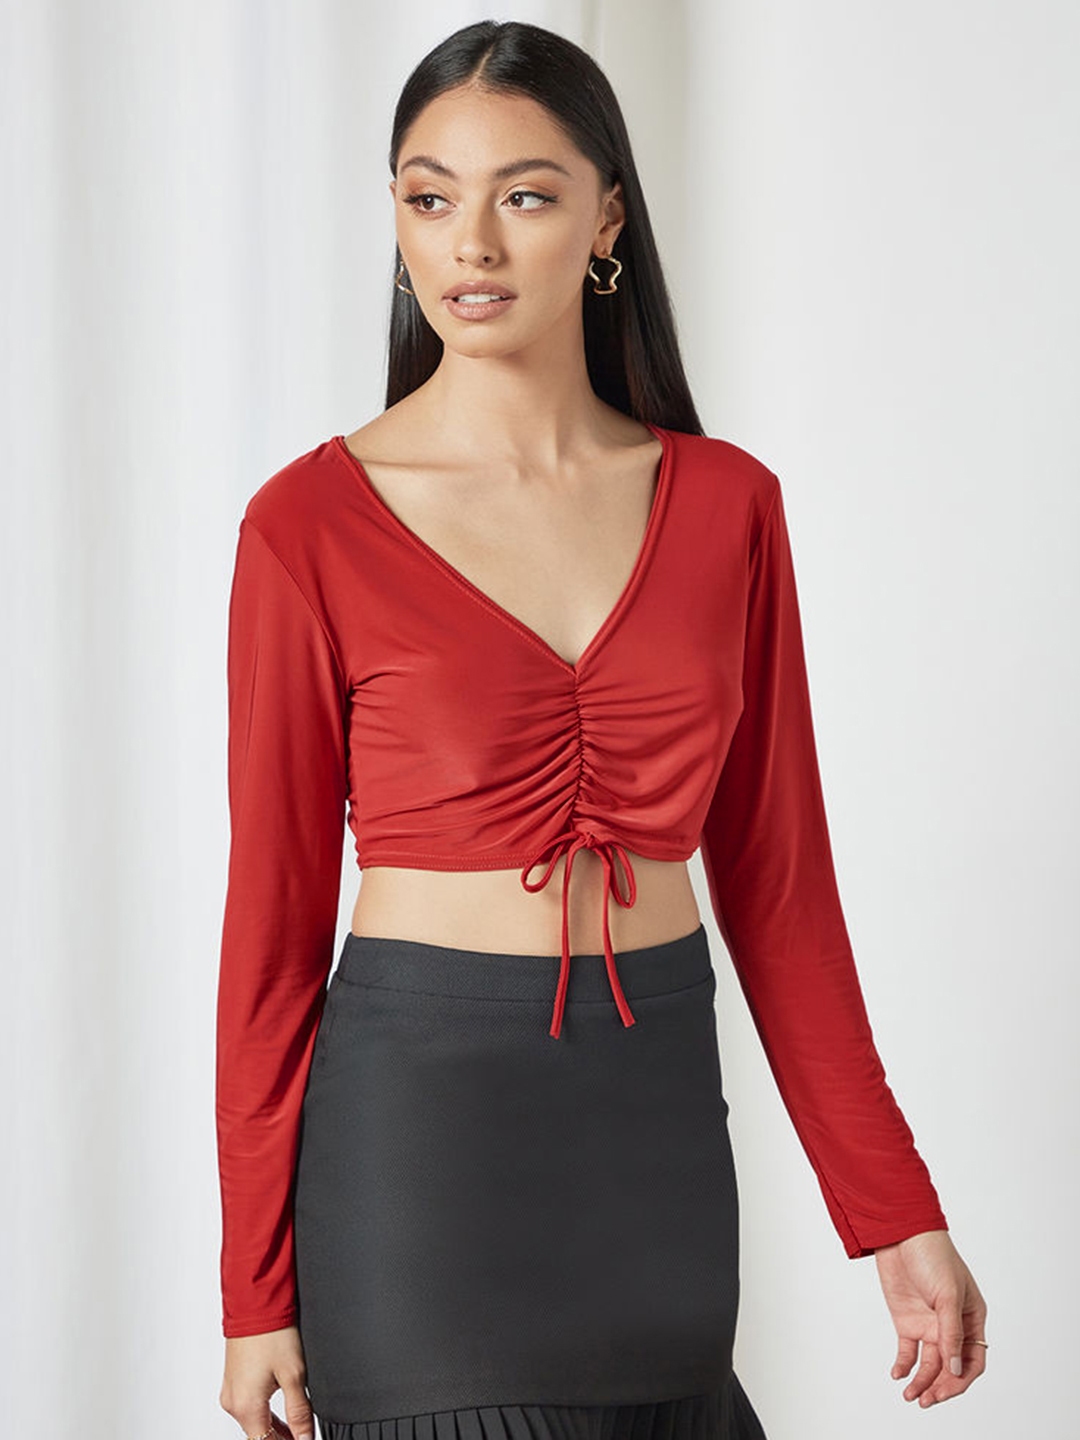 Buy Femme Luxe Red Solid Ruched Crop Top - Tops for Women 17410534 | Myntra